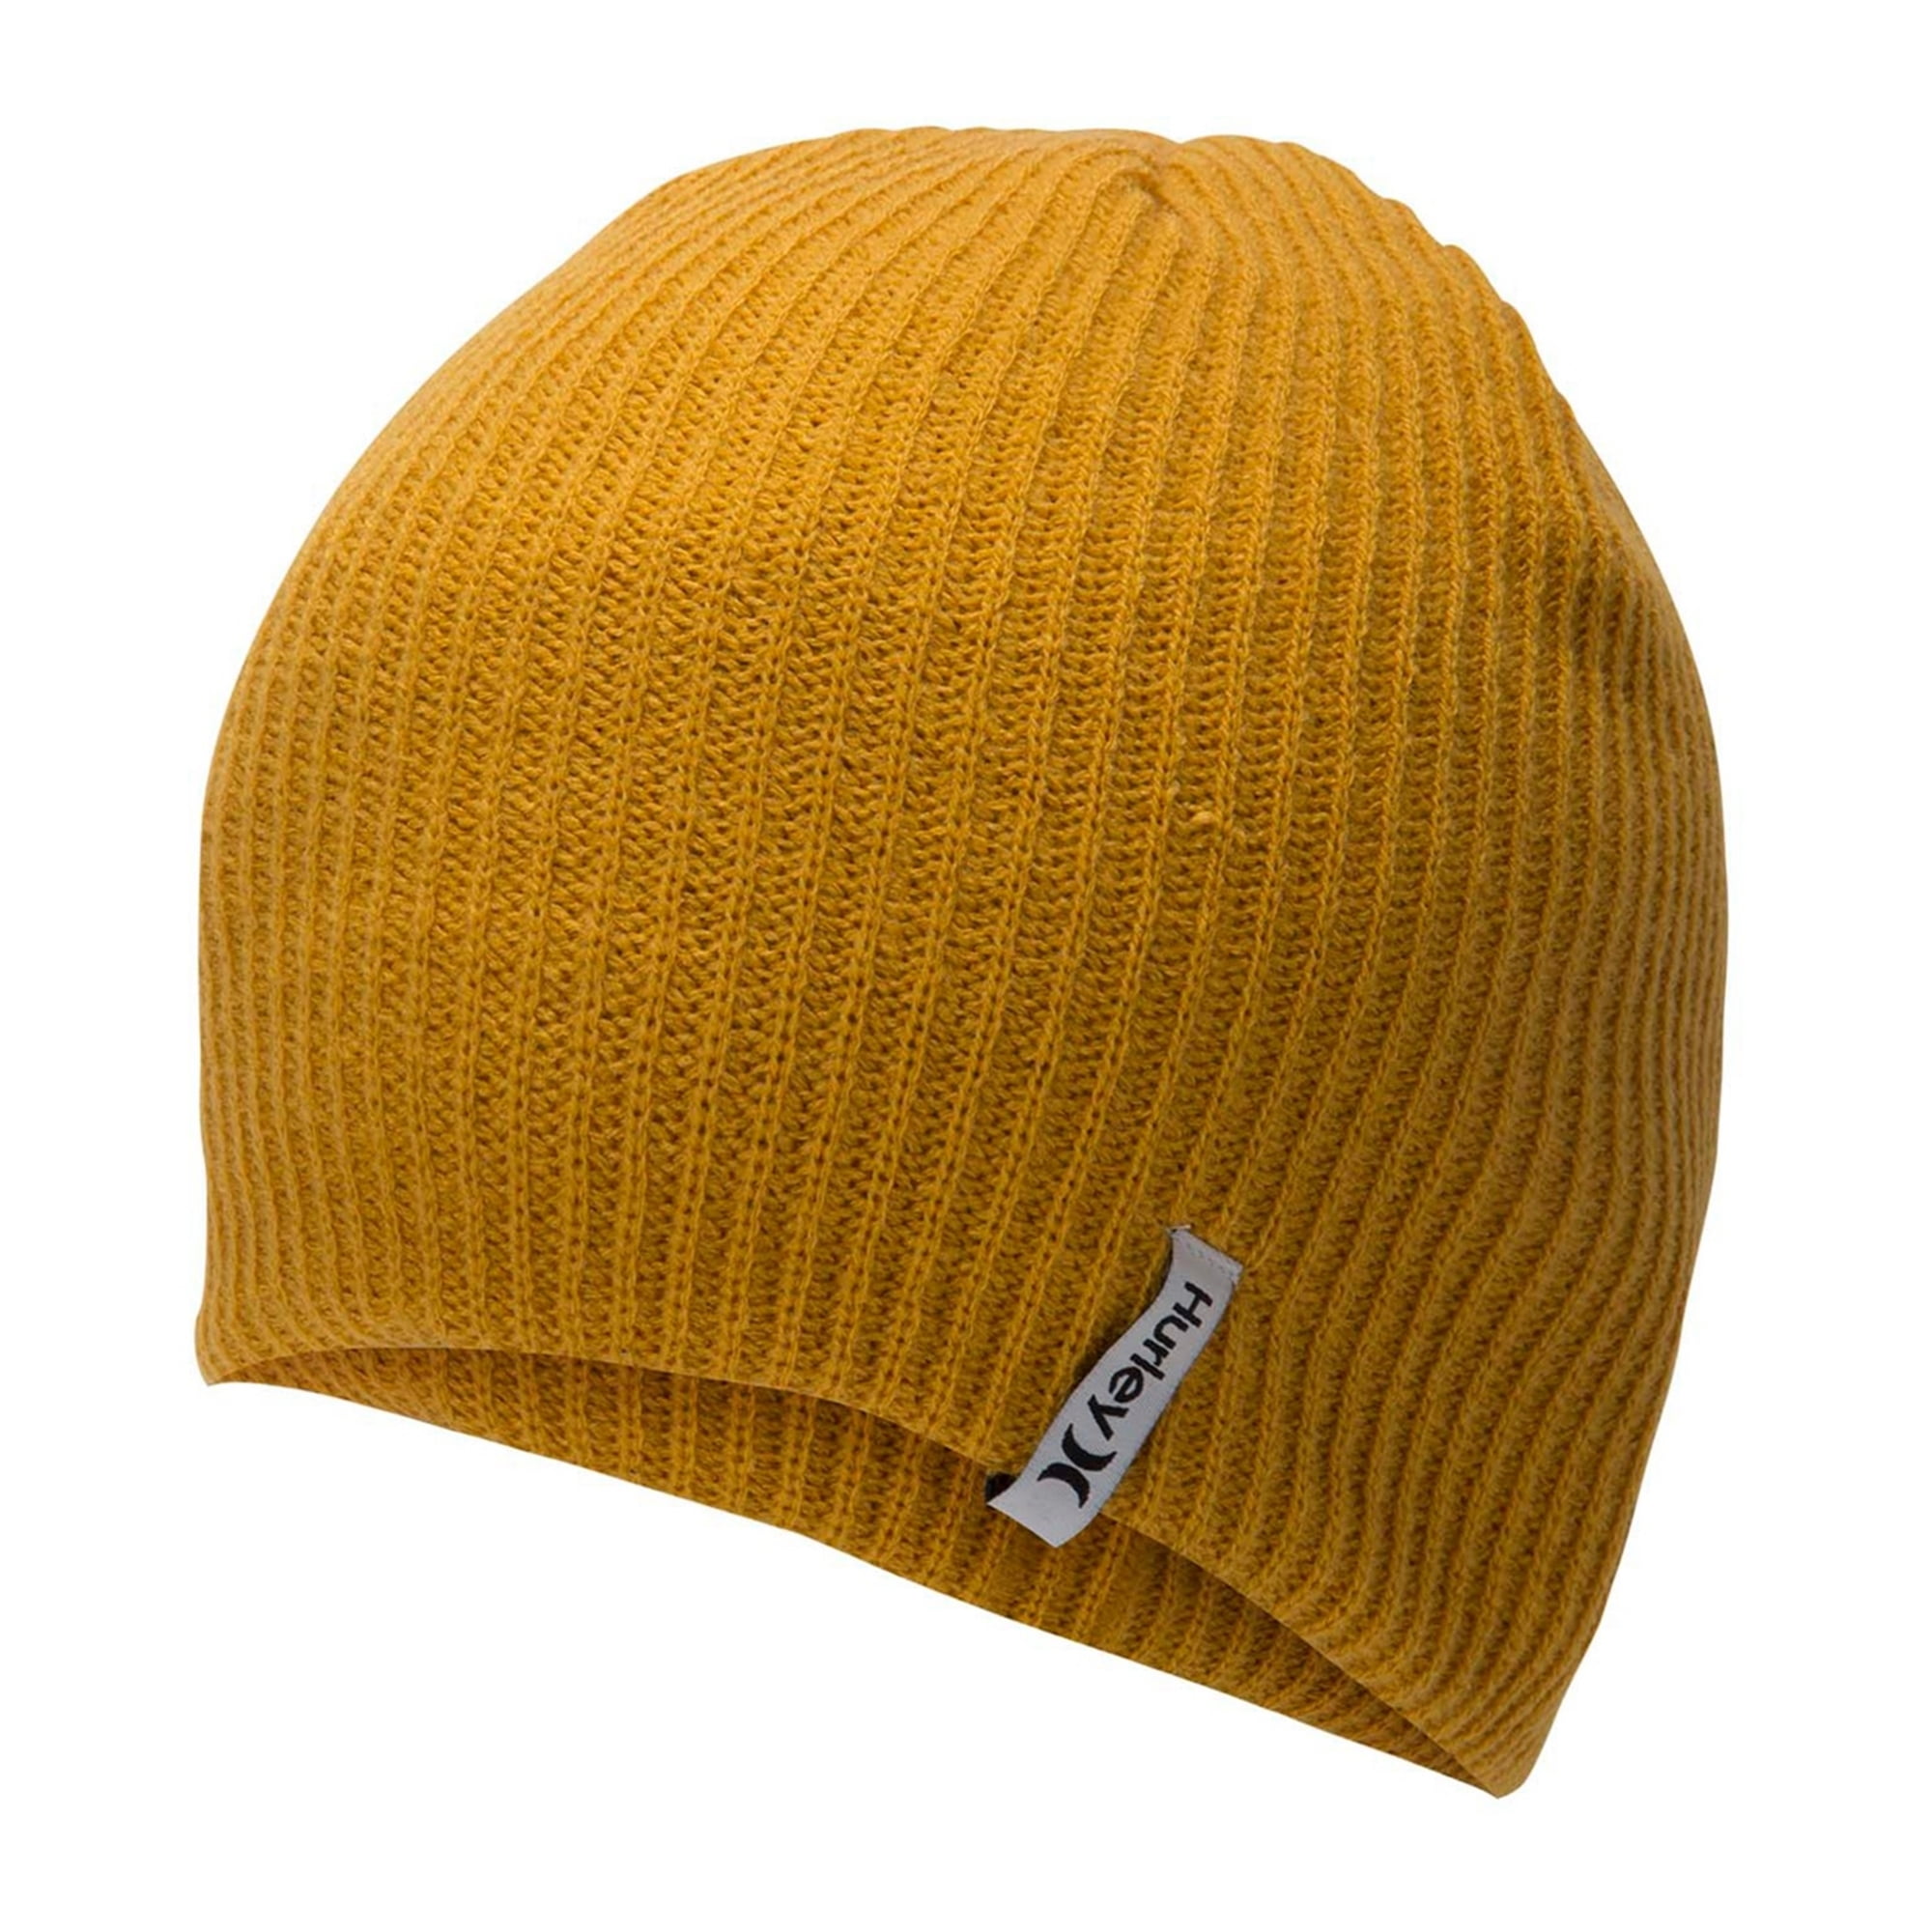 Hurley - Hurley Mens Cable Knit Beanie Hat, yellow, One Size - Walmart ...